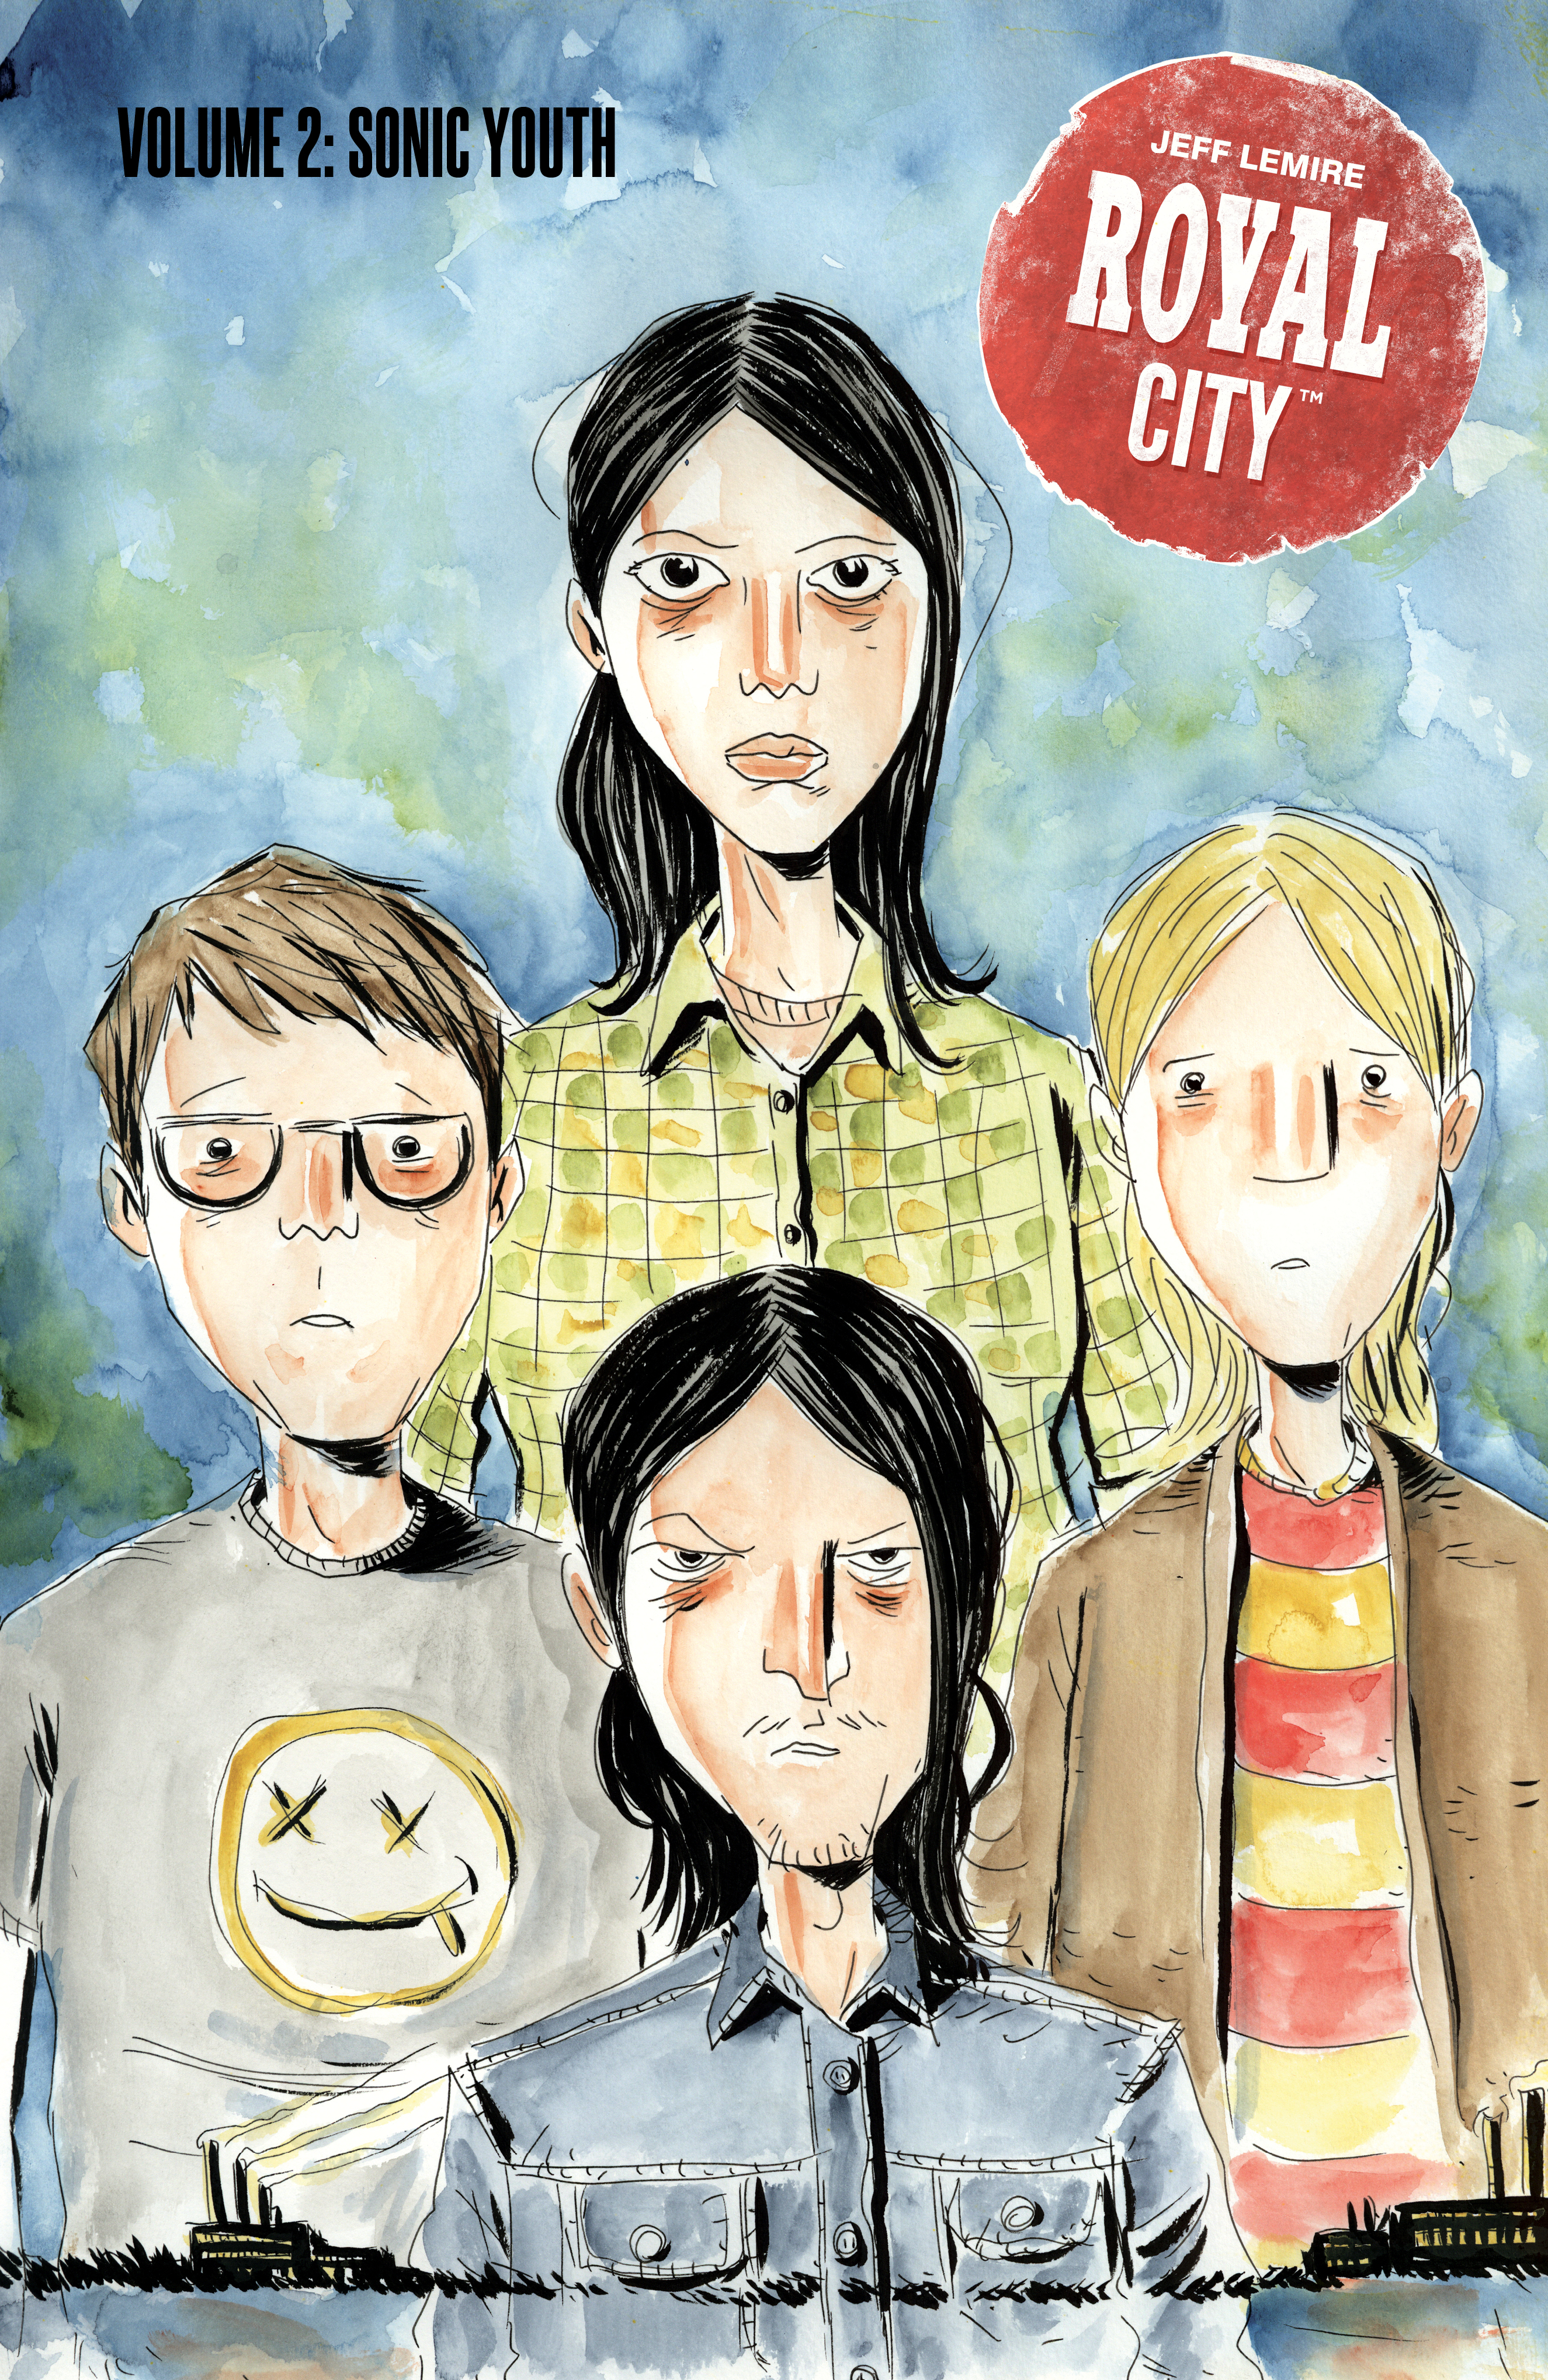 Royal City Graphic Novel Volume 2 Sonic Youth (Mature)